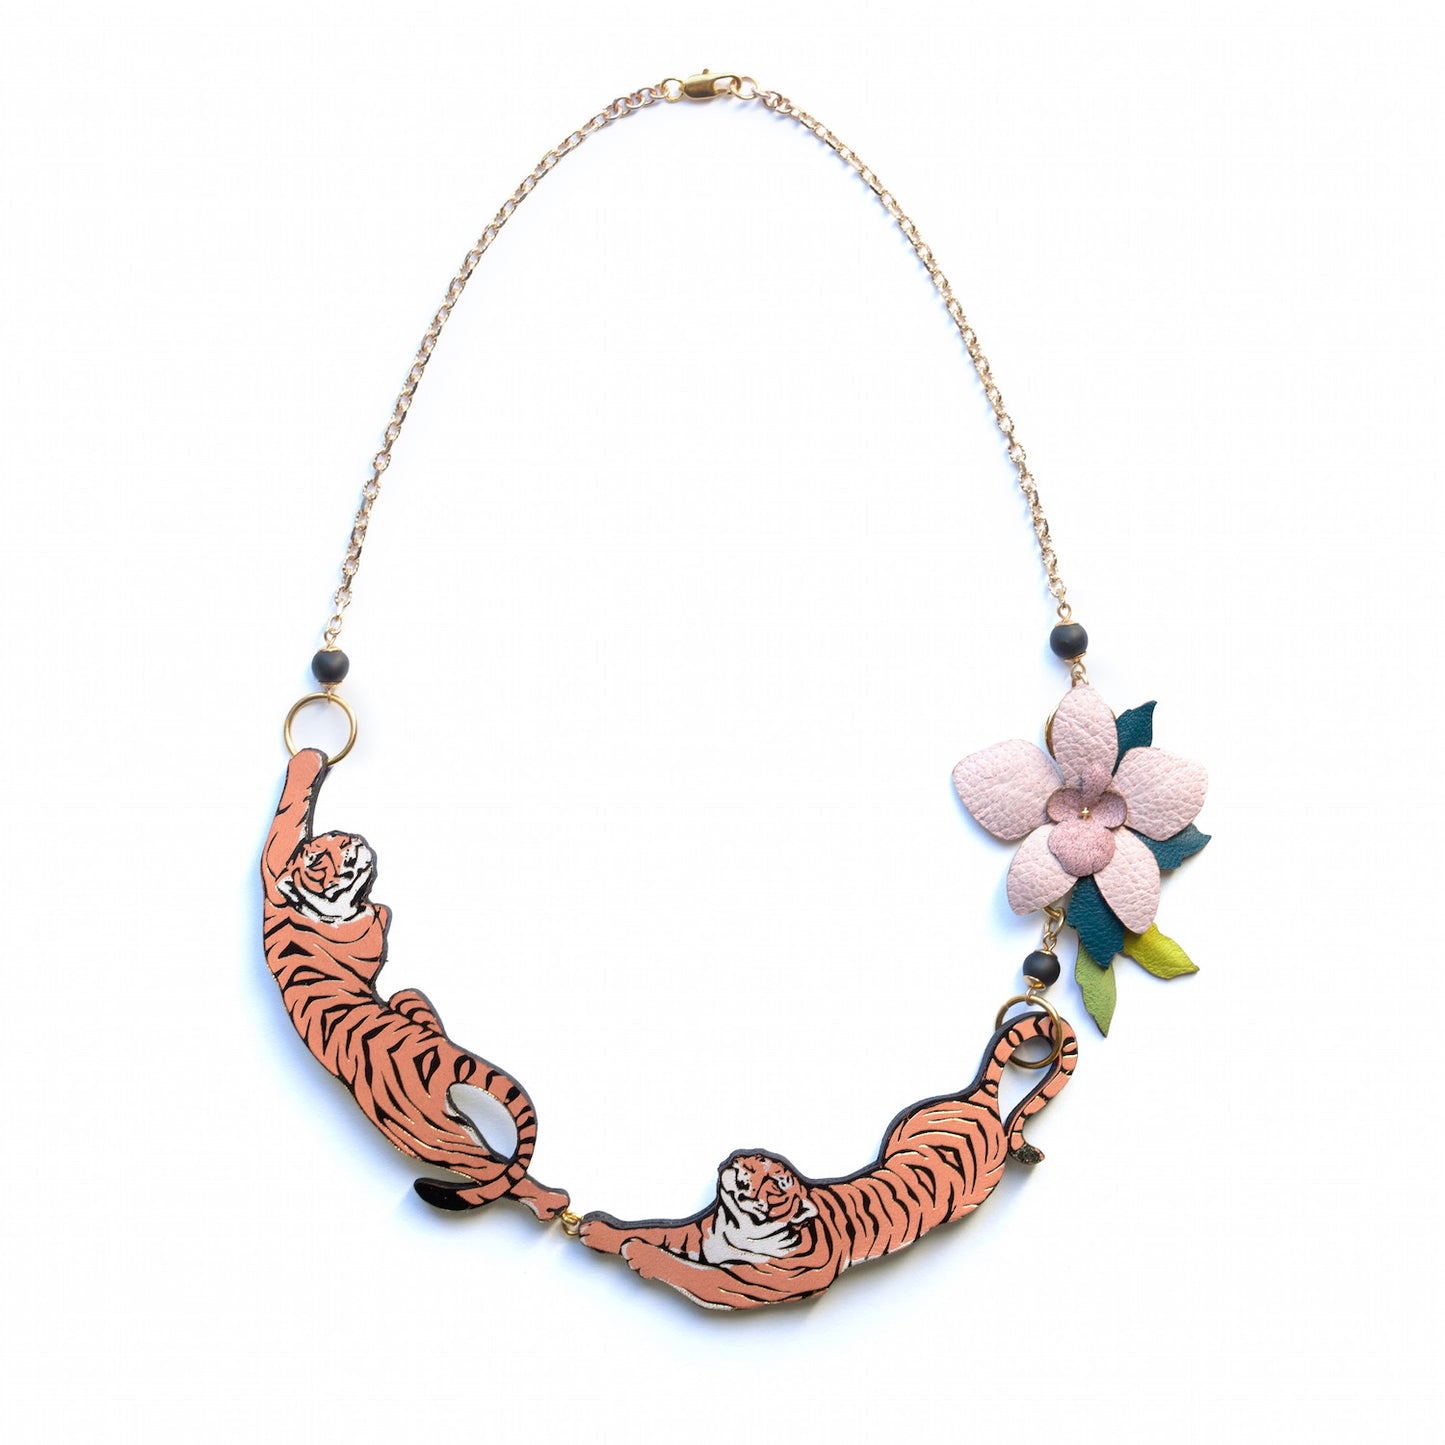 LEAPING TIGER . necklace